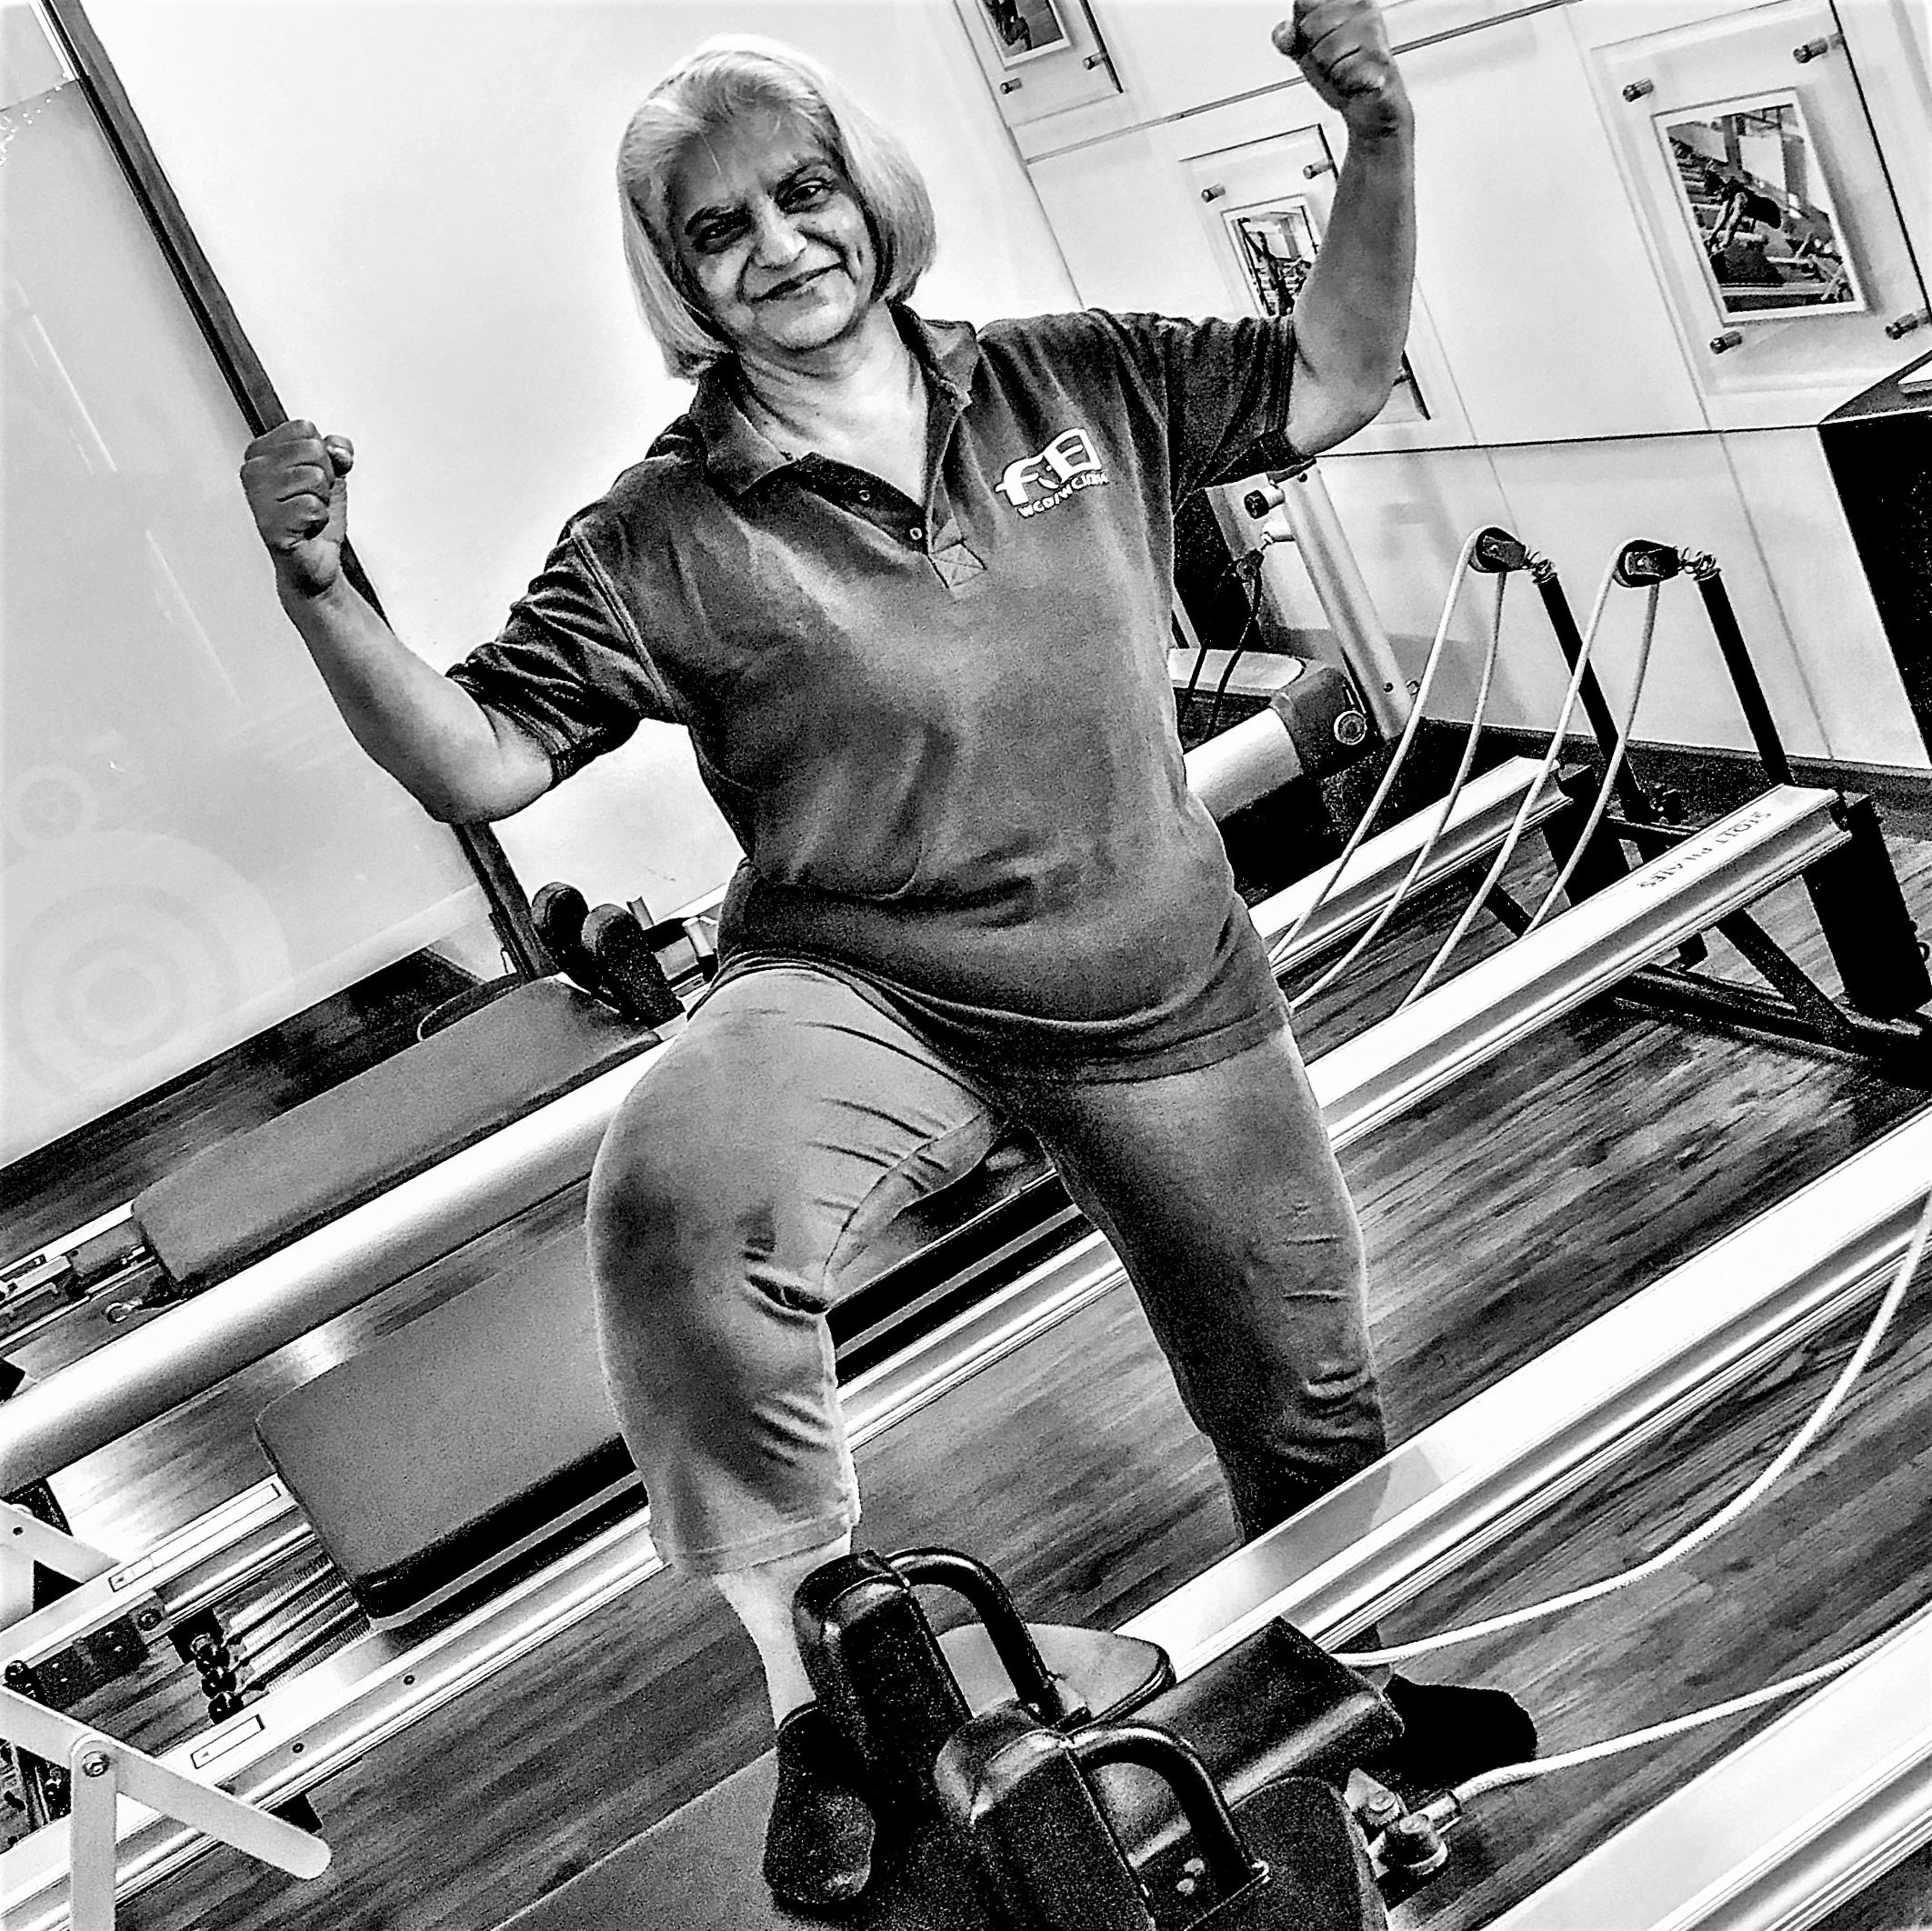 Pilates workouts at The Zone, designed by Anjali Sareen based on her 30 years experience. Workouts for all fitness levels and age groups.